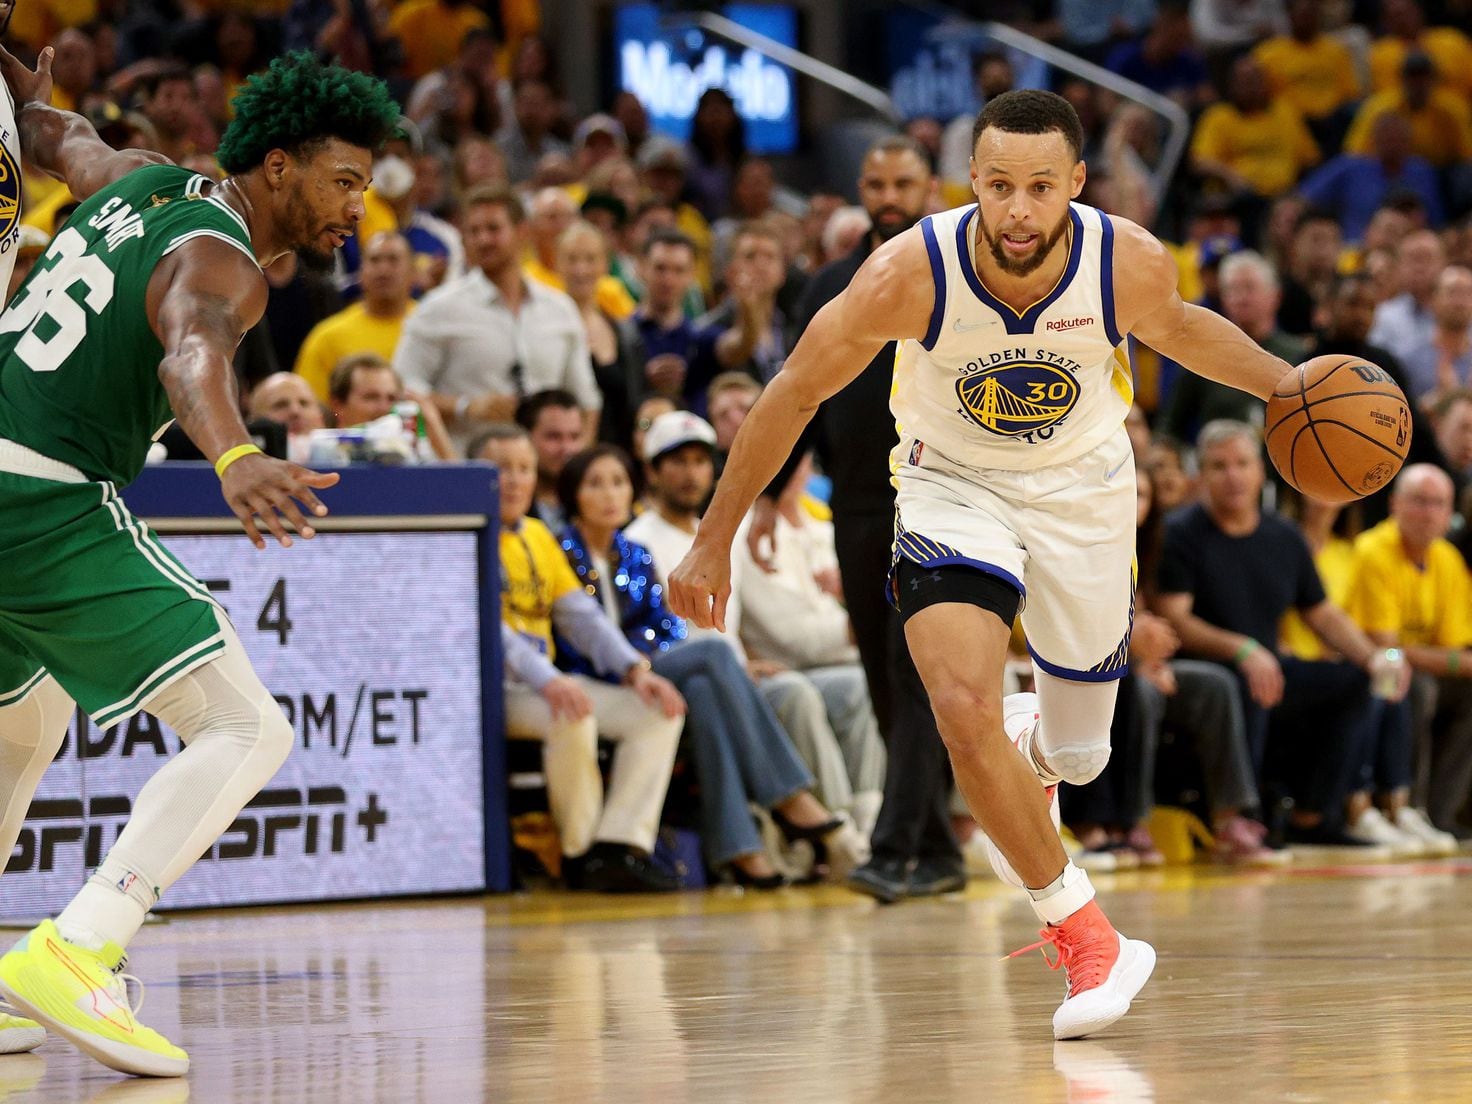 RATINGS: Warriors 2018 NBA Finals Win Down From 2017 For ABC – Deadline